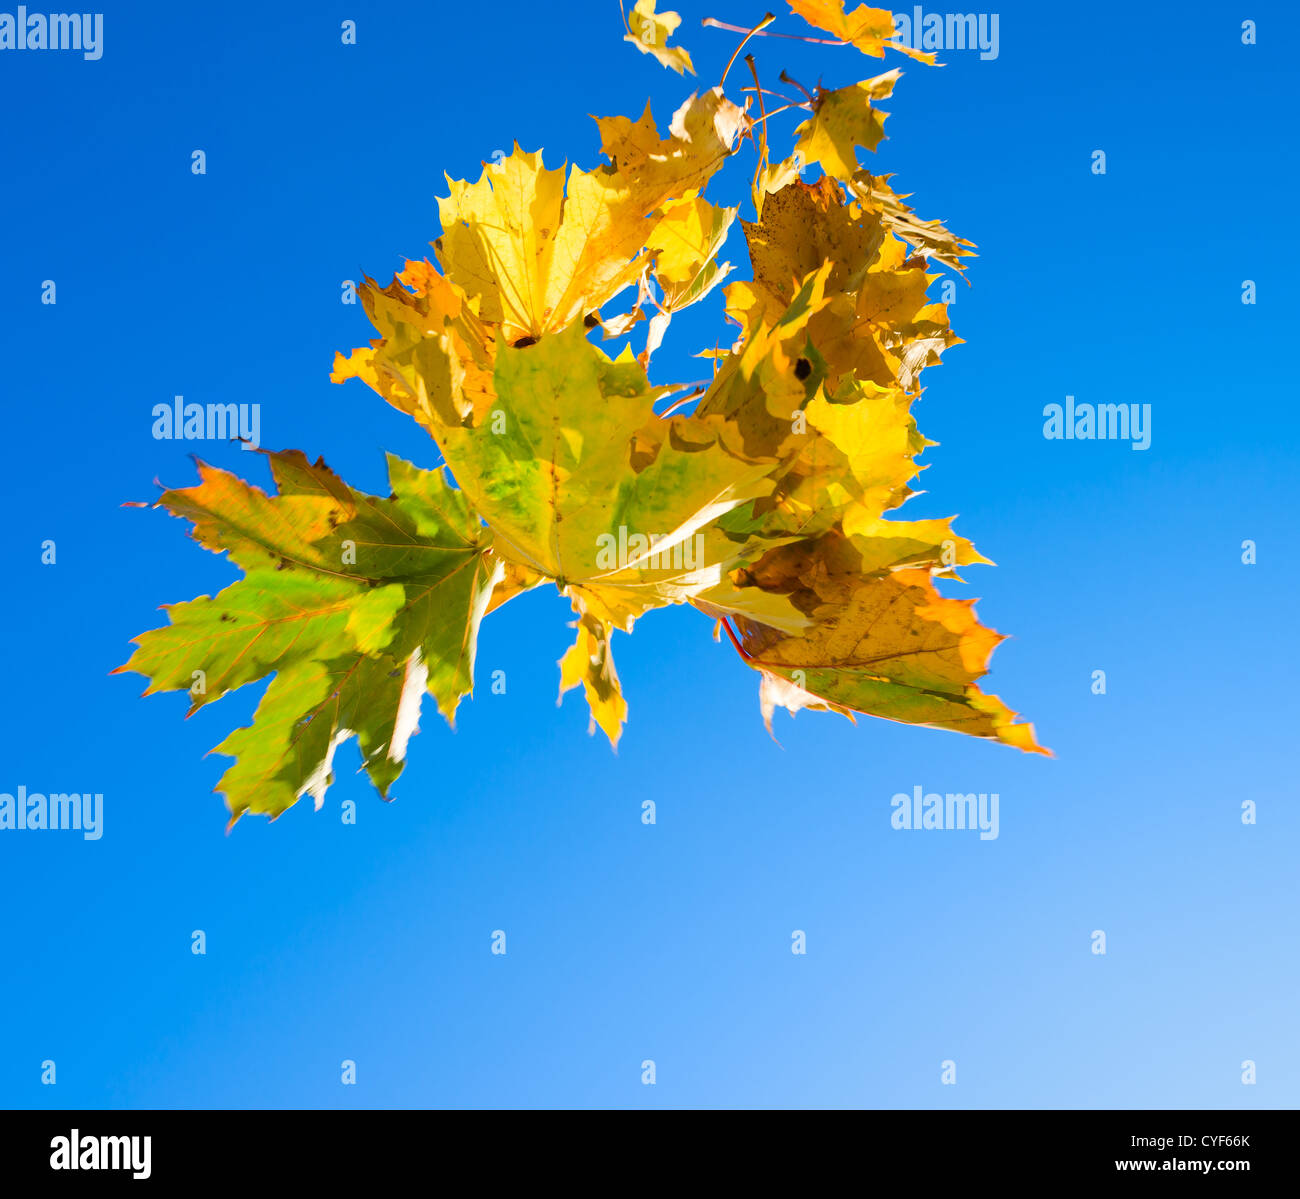 Maple leaves falling down, blue sky on the background. Stock Photo